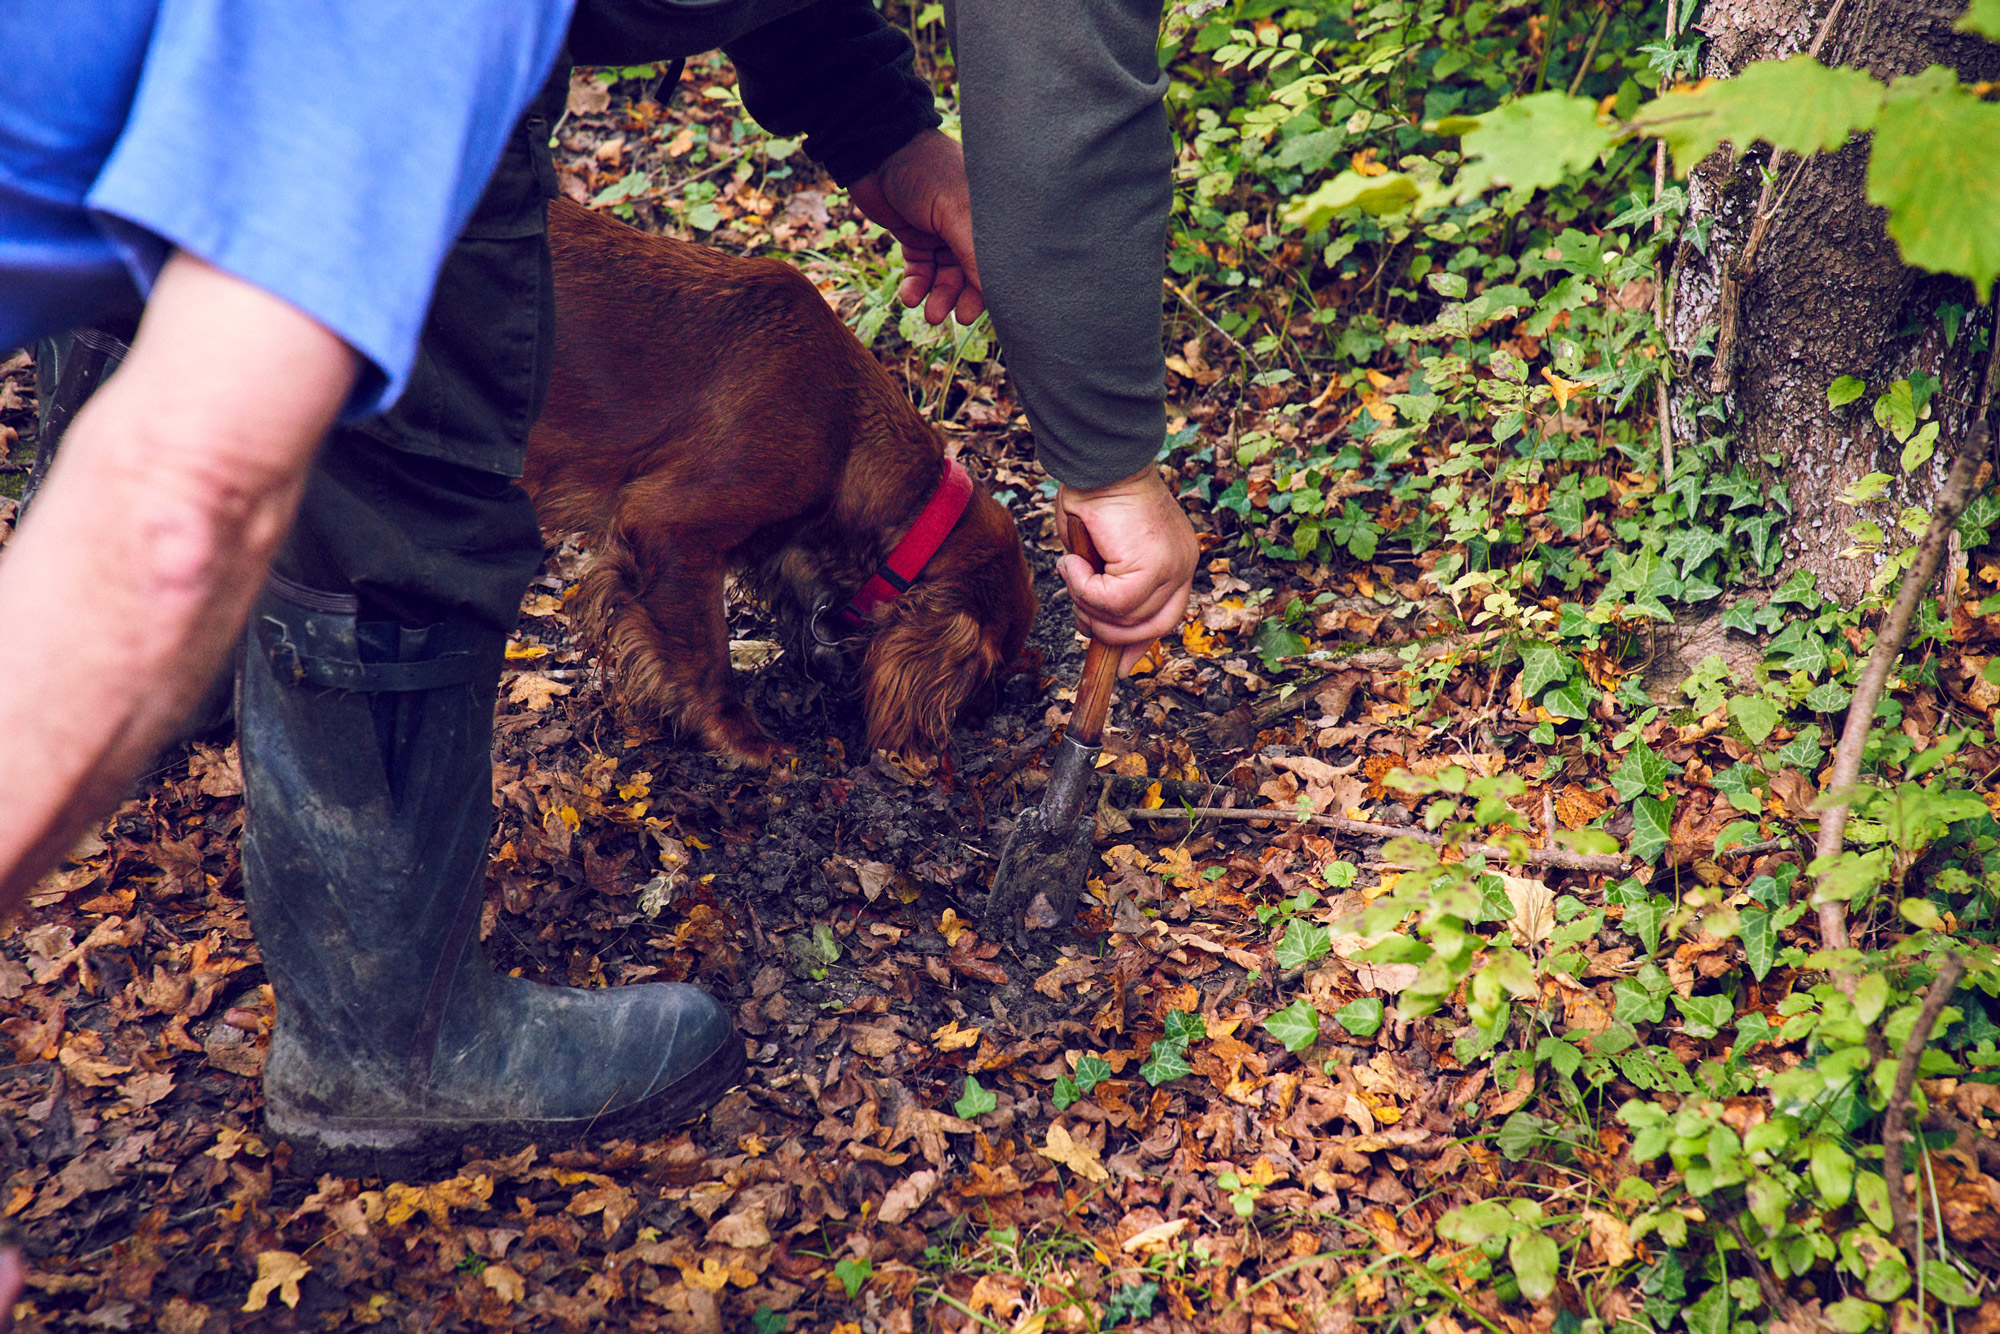 Dog sniffs ground which man has dug up with trowel